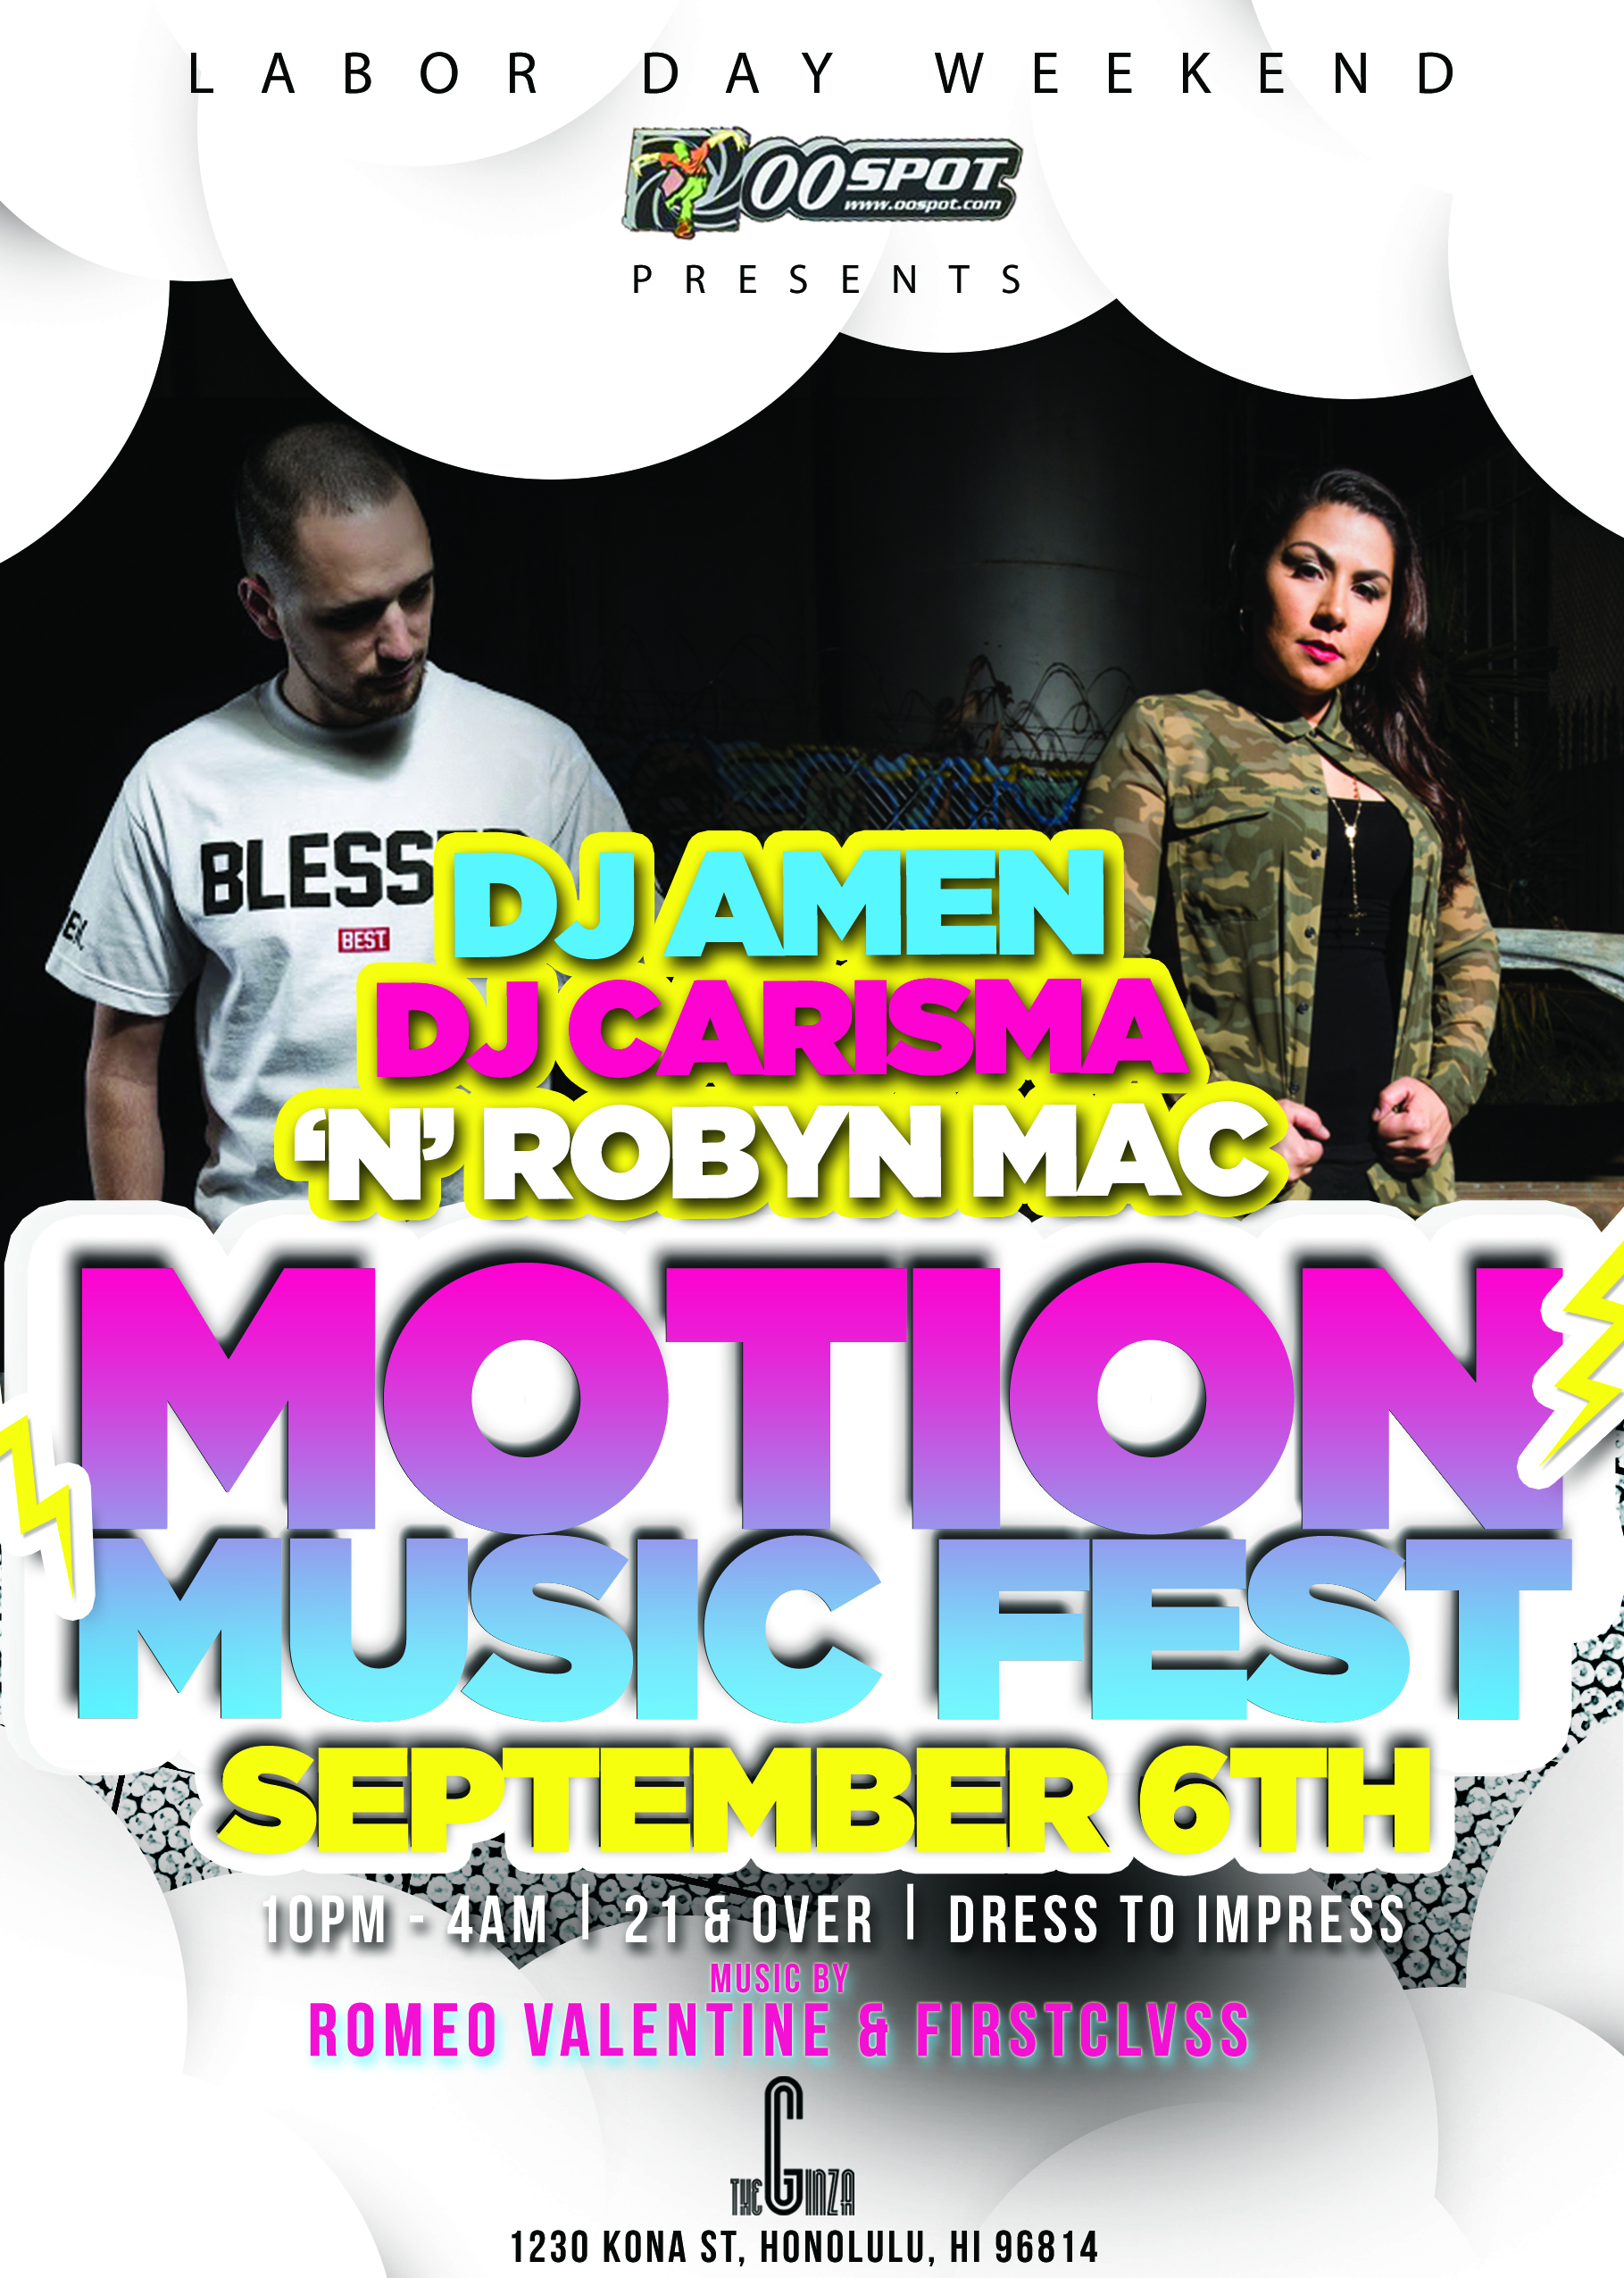 Motion Music Festival Tickets 09/06/15